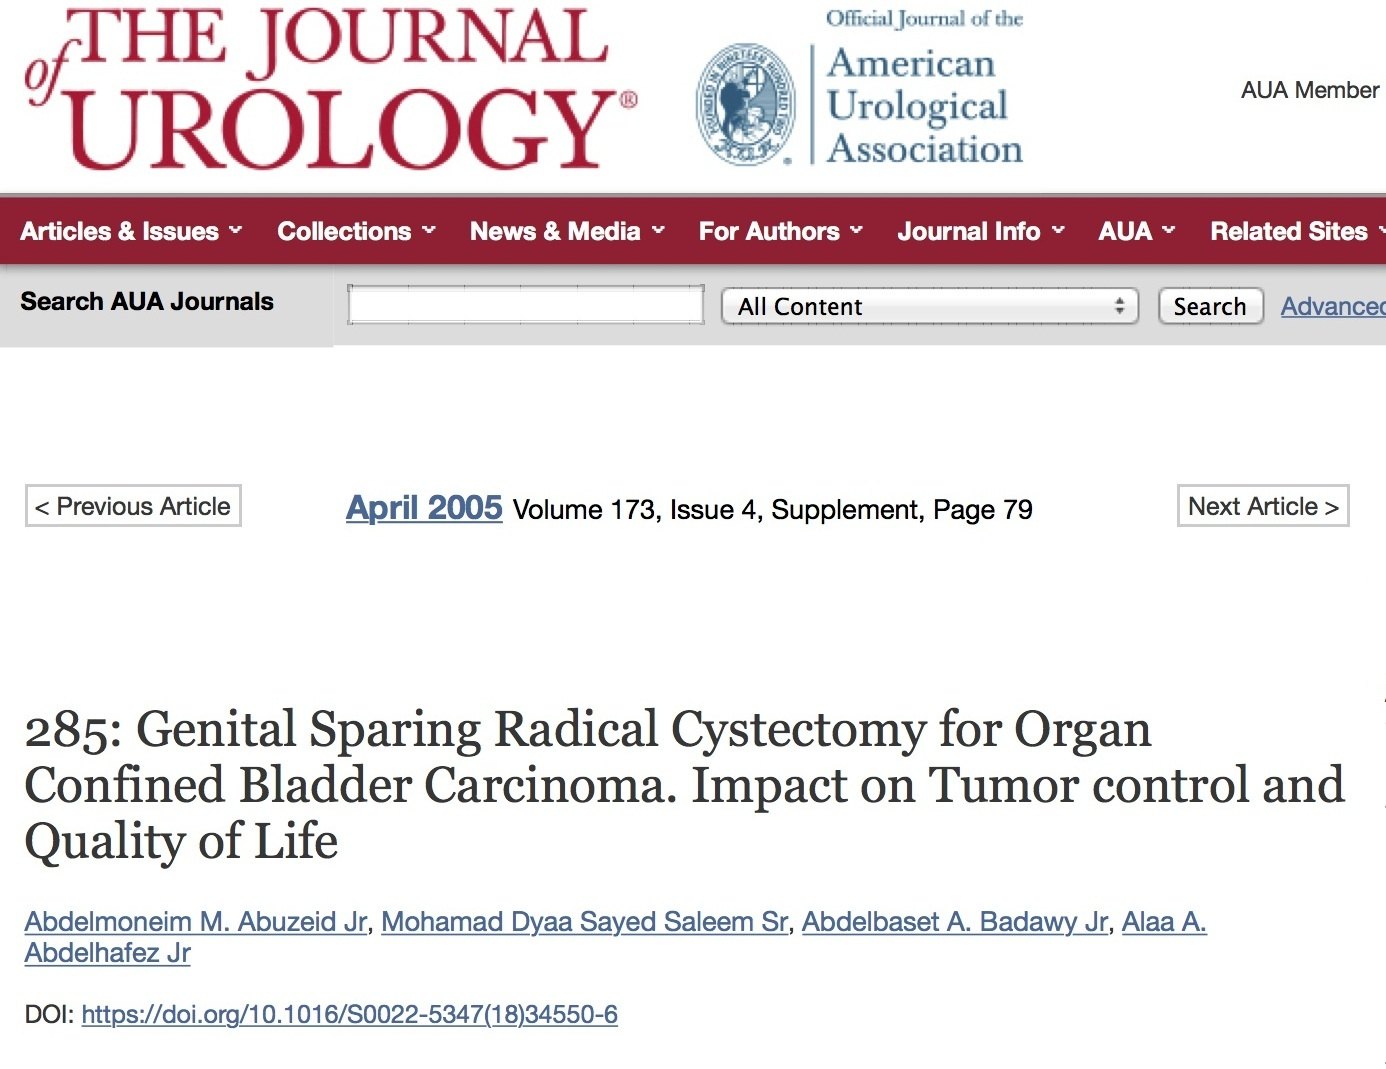 Genital sparing Radicale Cystectomy For Organ Confined bladder Carcinoma.  Impact on tumor Control And Quality Of  Life